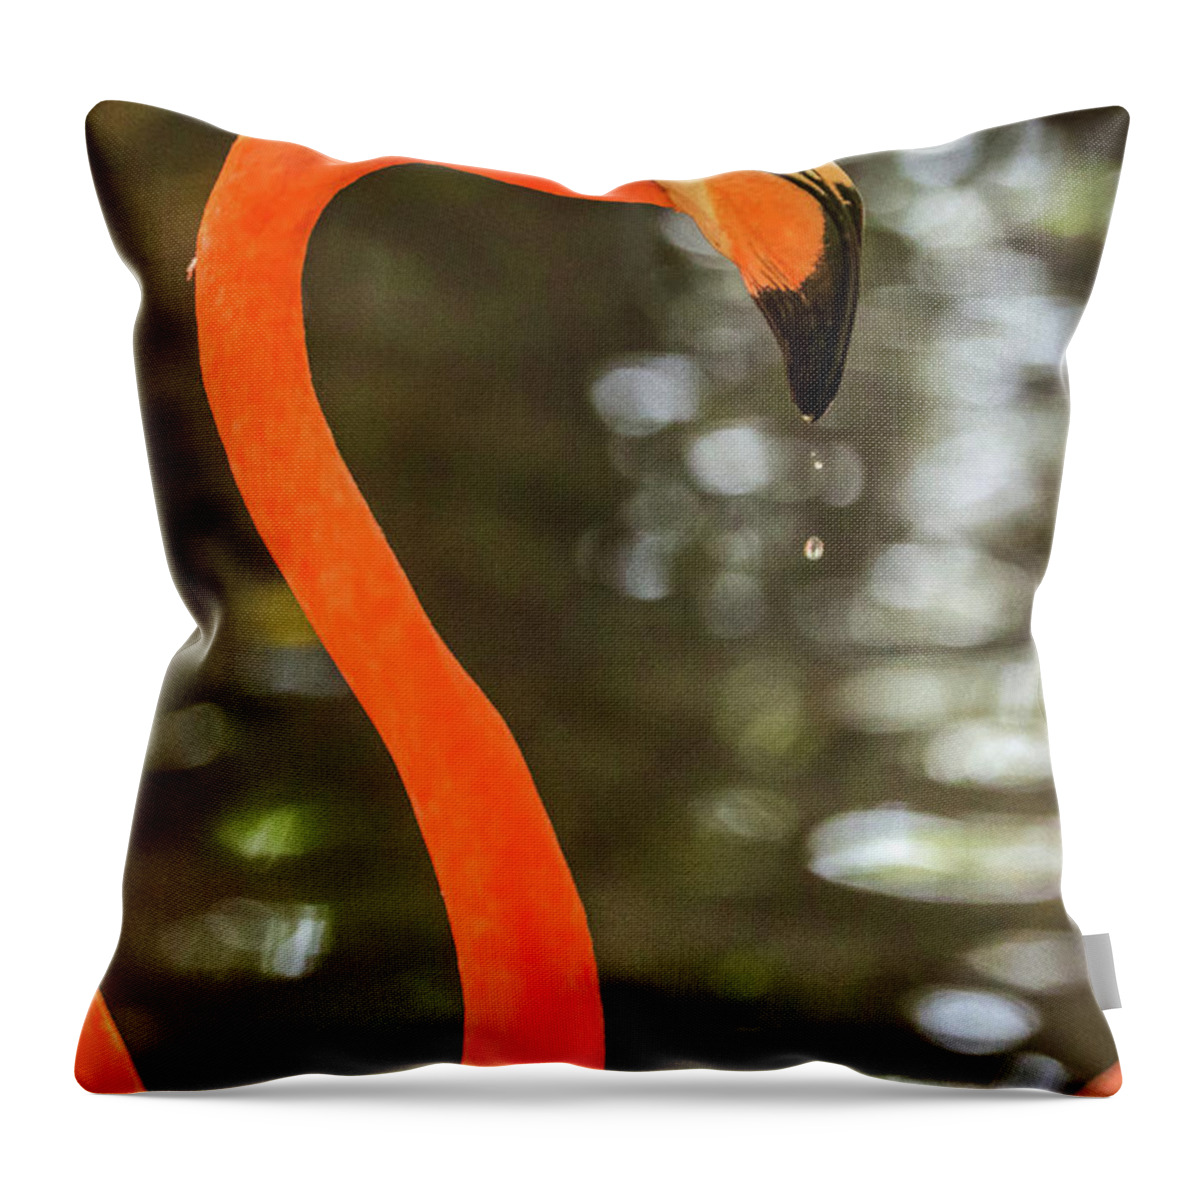 Flamingos Cartagena Colombia Throw Pillow featuring the photograph Flamingos Cartagena Colombia #39 by Paul James Bannerman